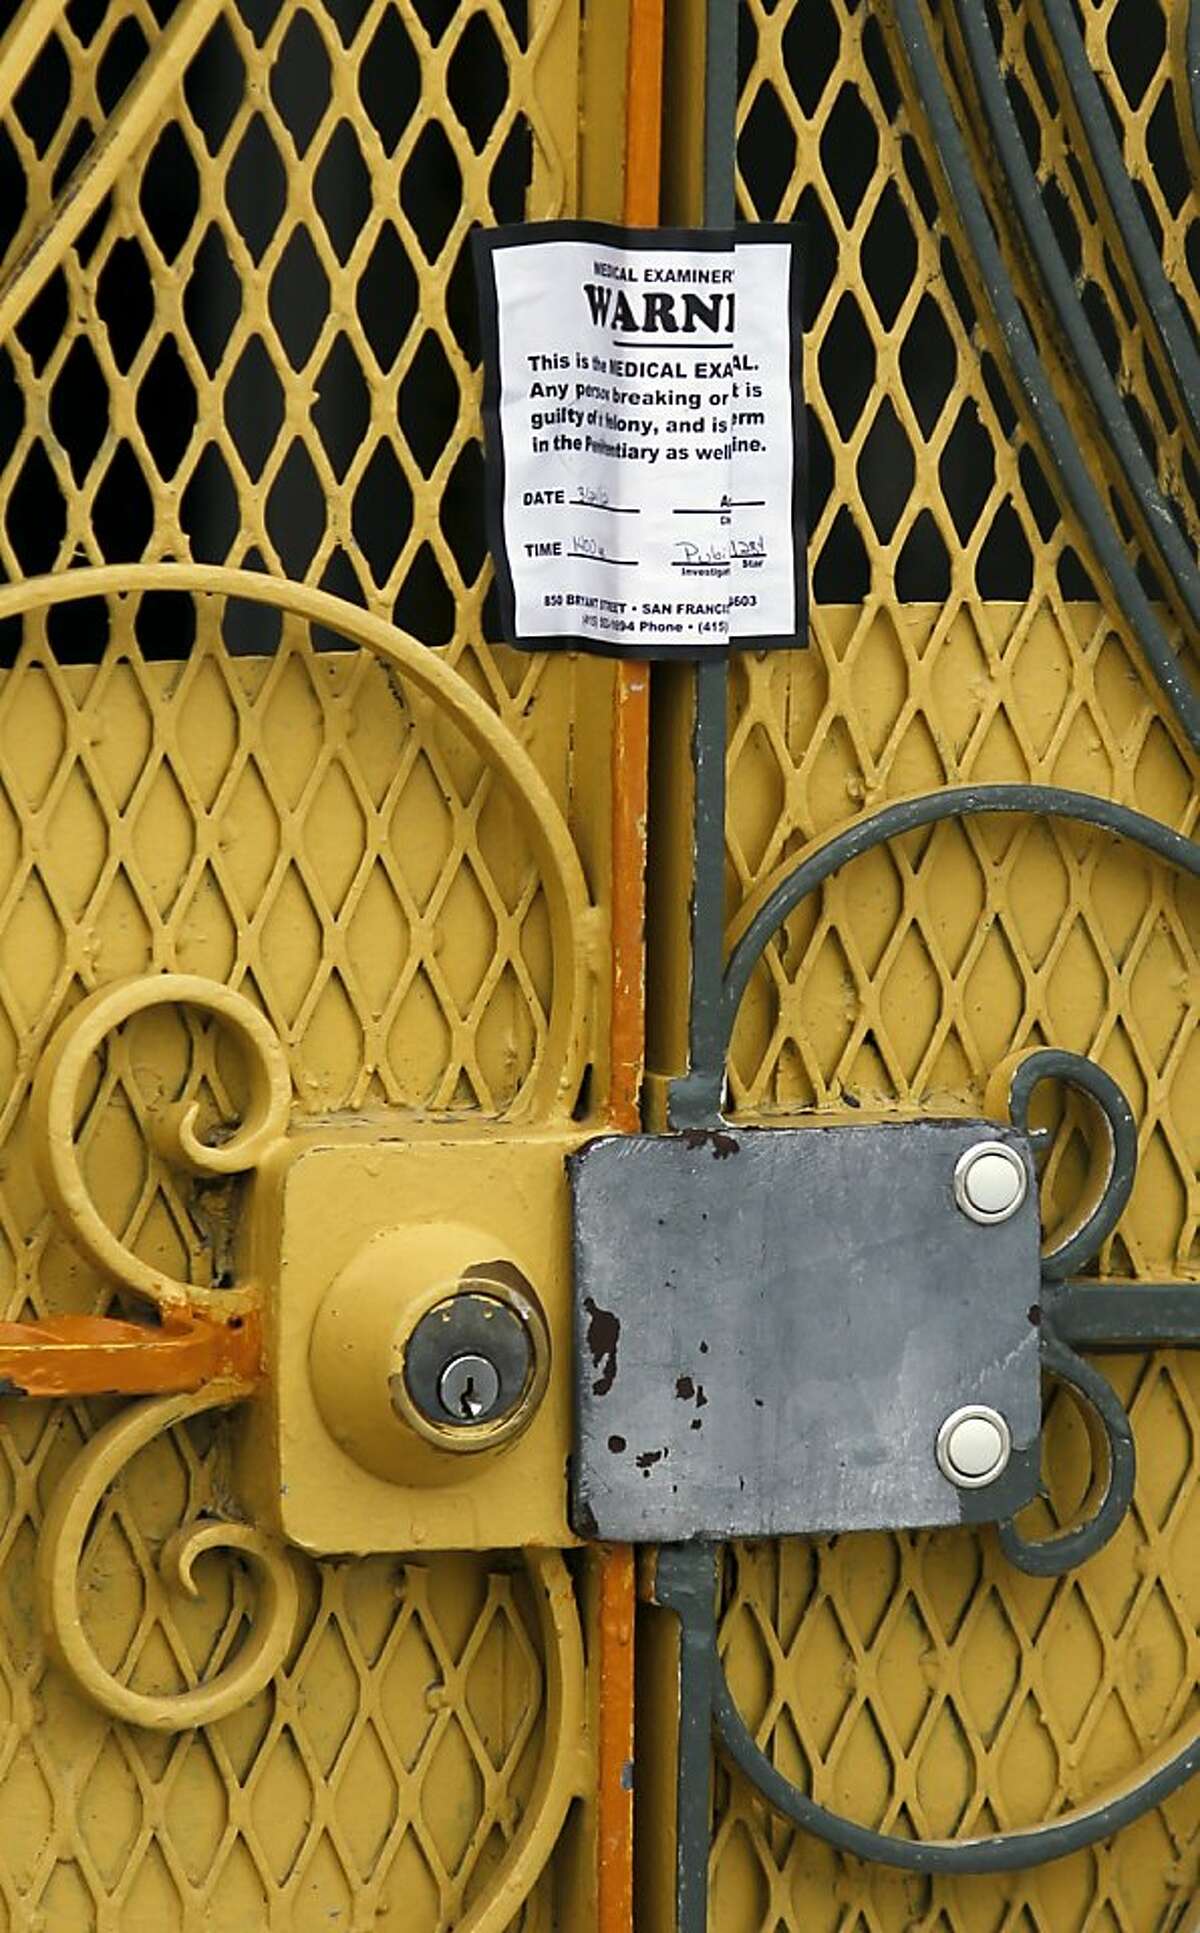 A medical examiner sticker seals the front door of 16 Howth Street, the site of a quintuple murder, on Monday, March 26, 2012 in San Francisco, Calif.